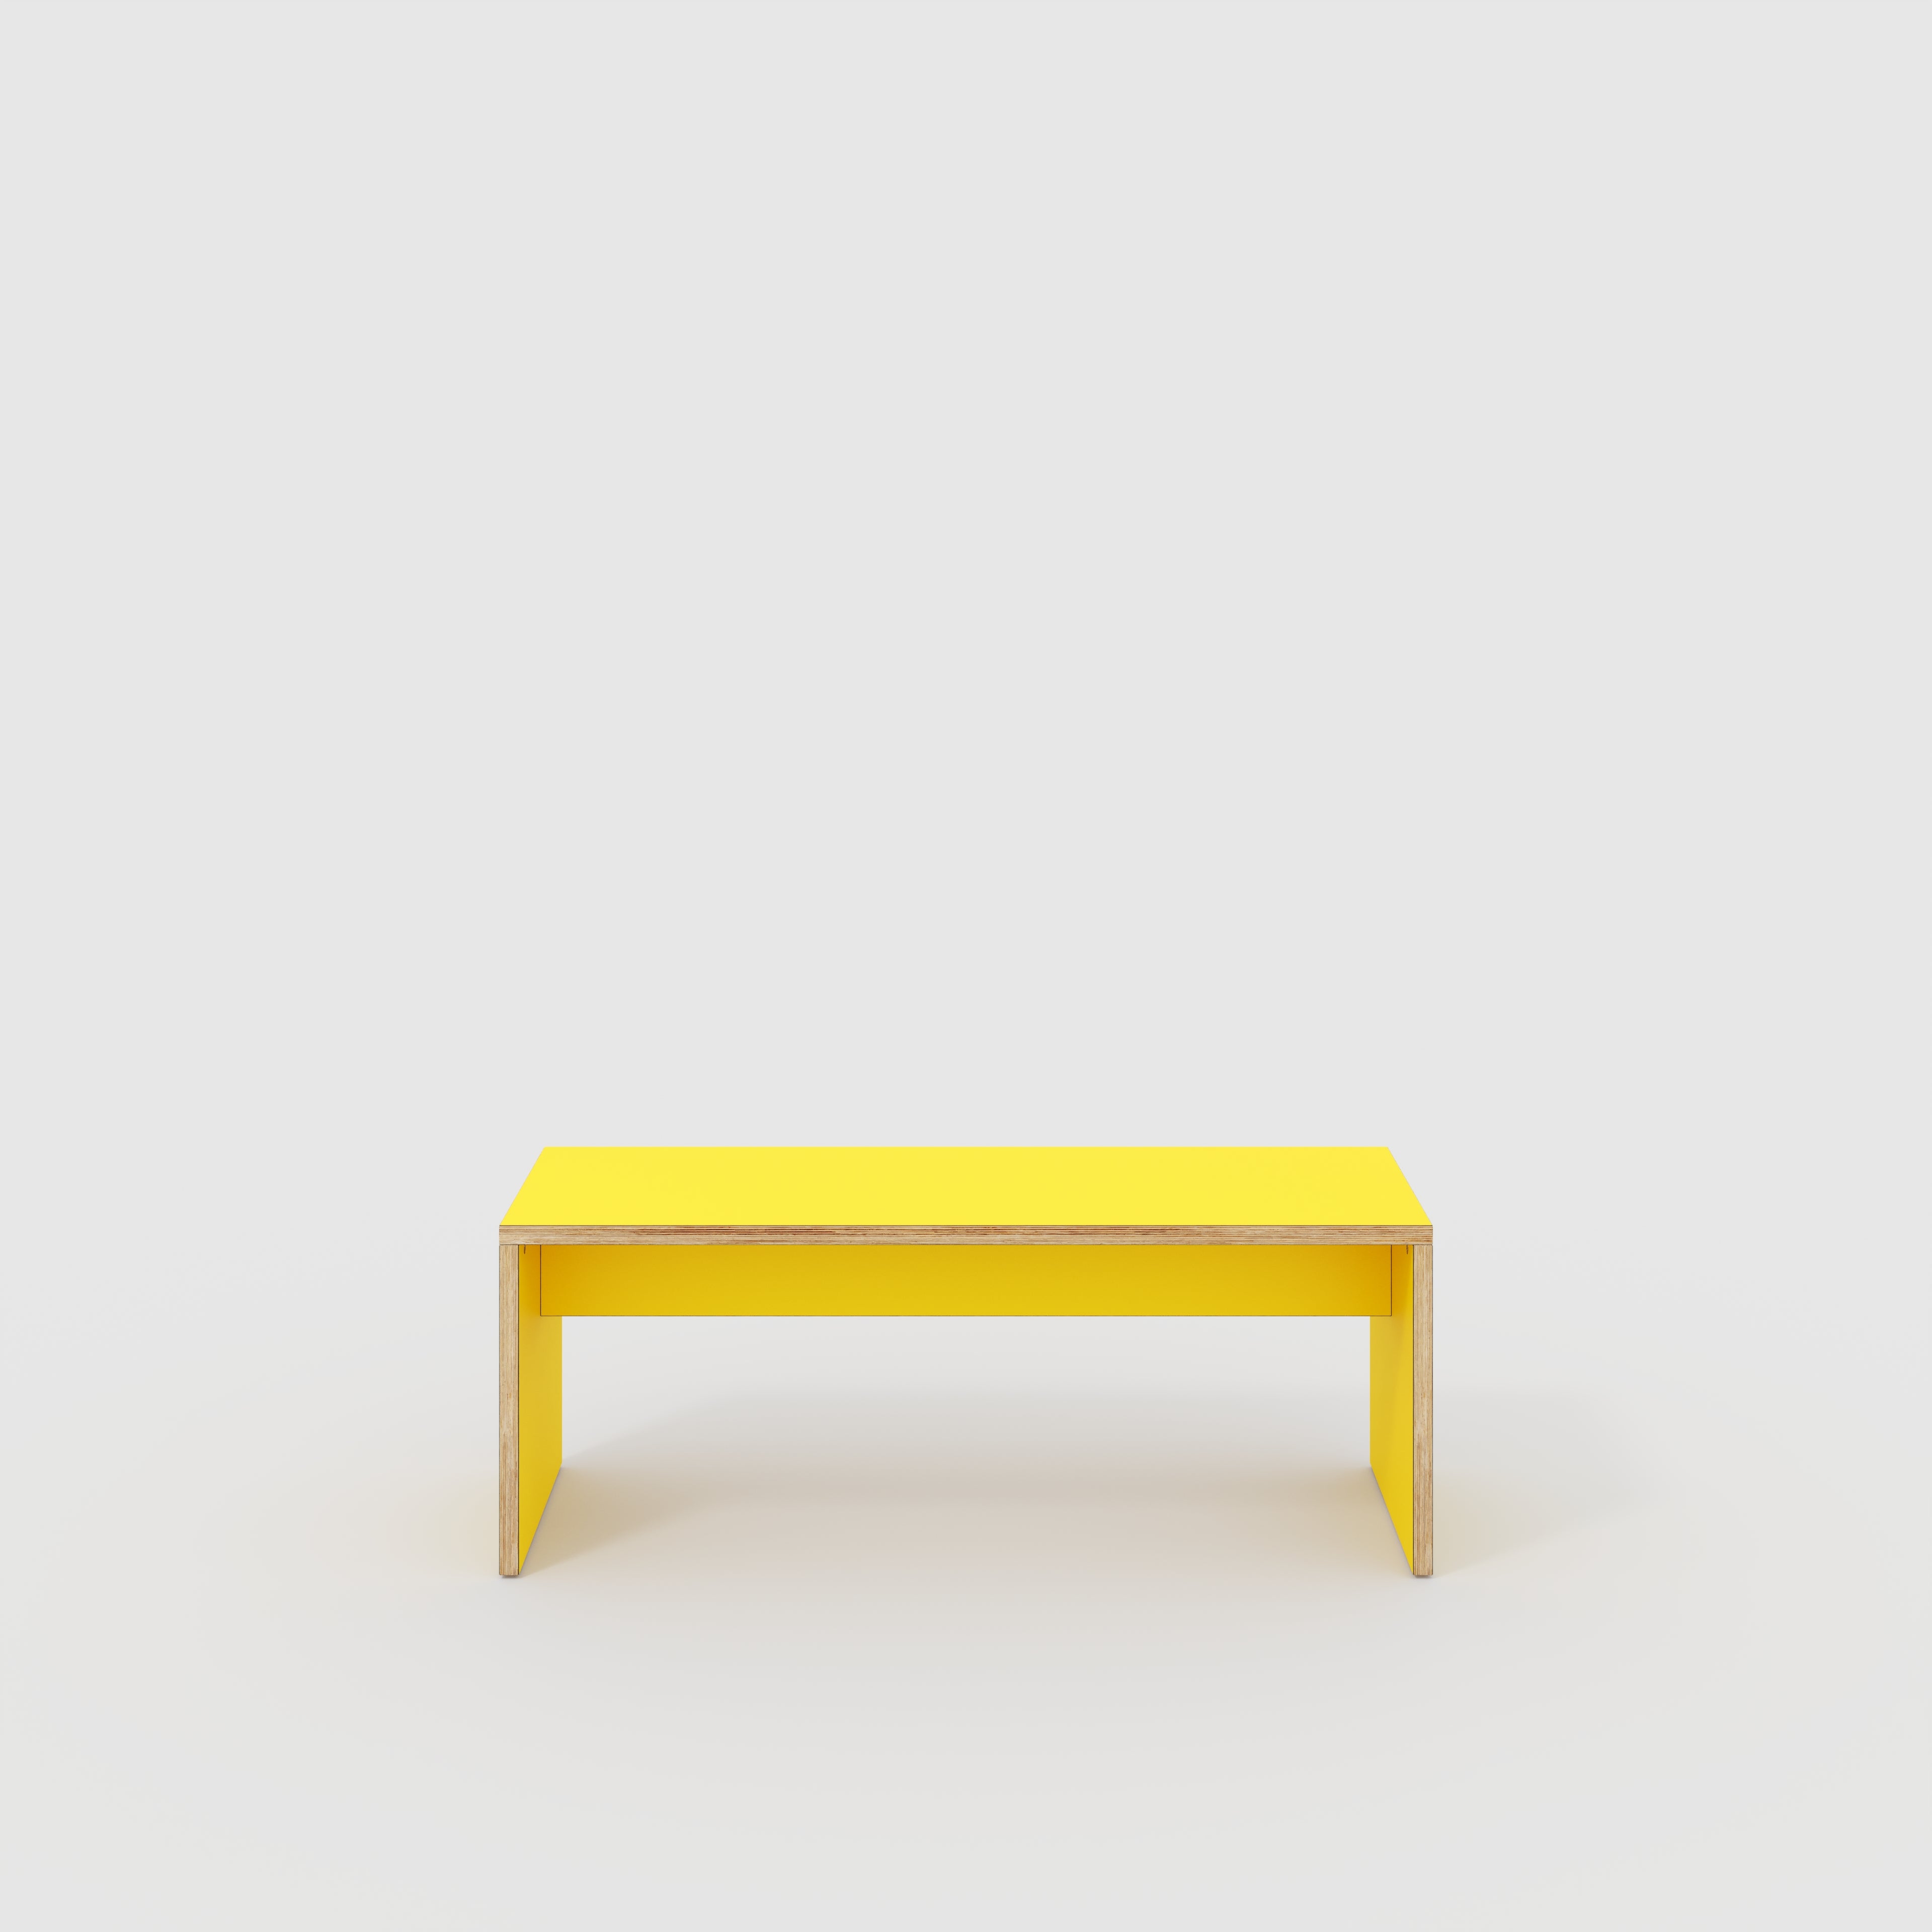 Bench Seat with Solid Sides - Formica Chrome Yellow - 1200(w) x 400(d)